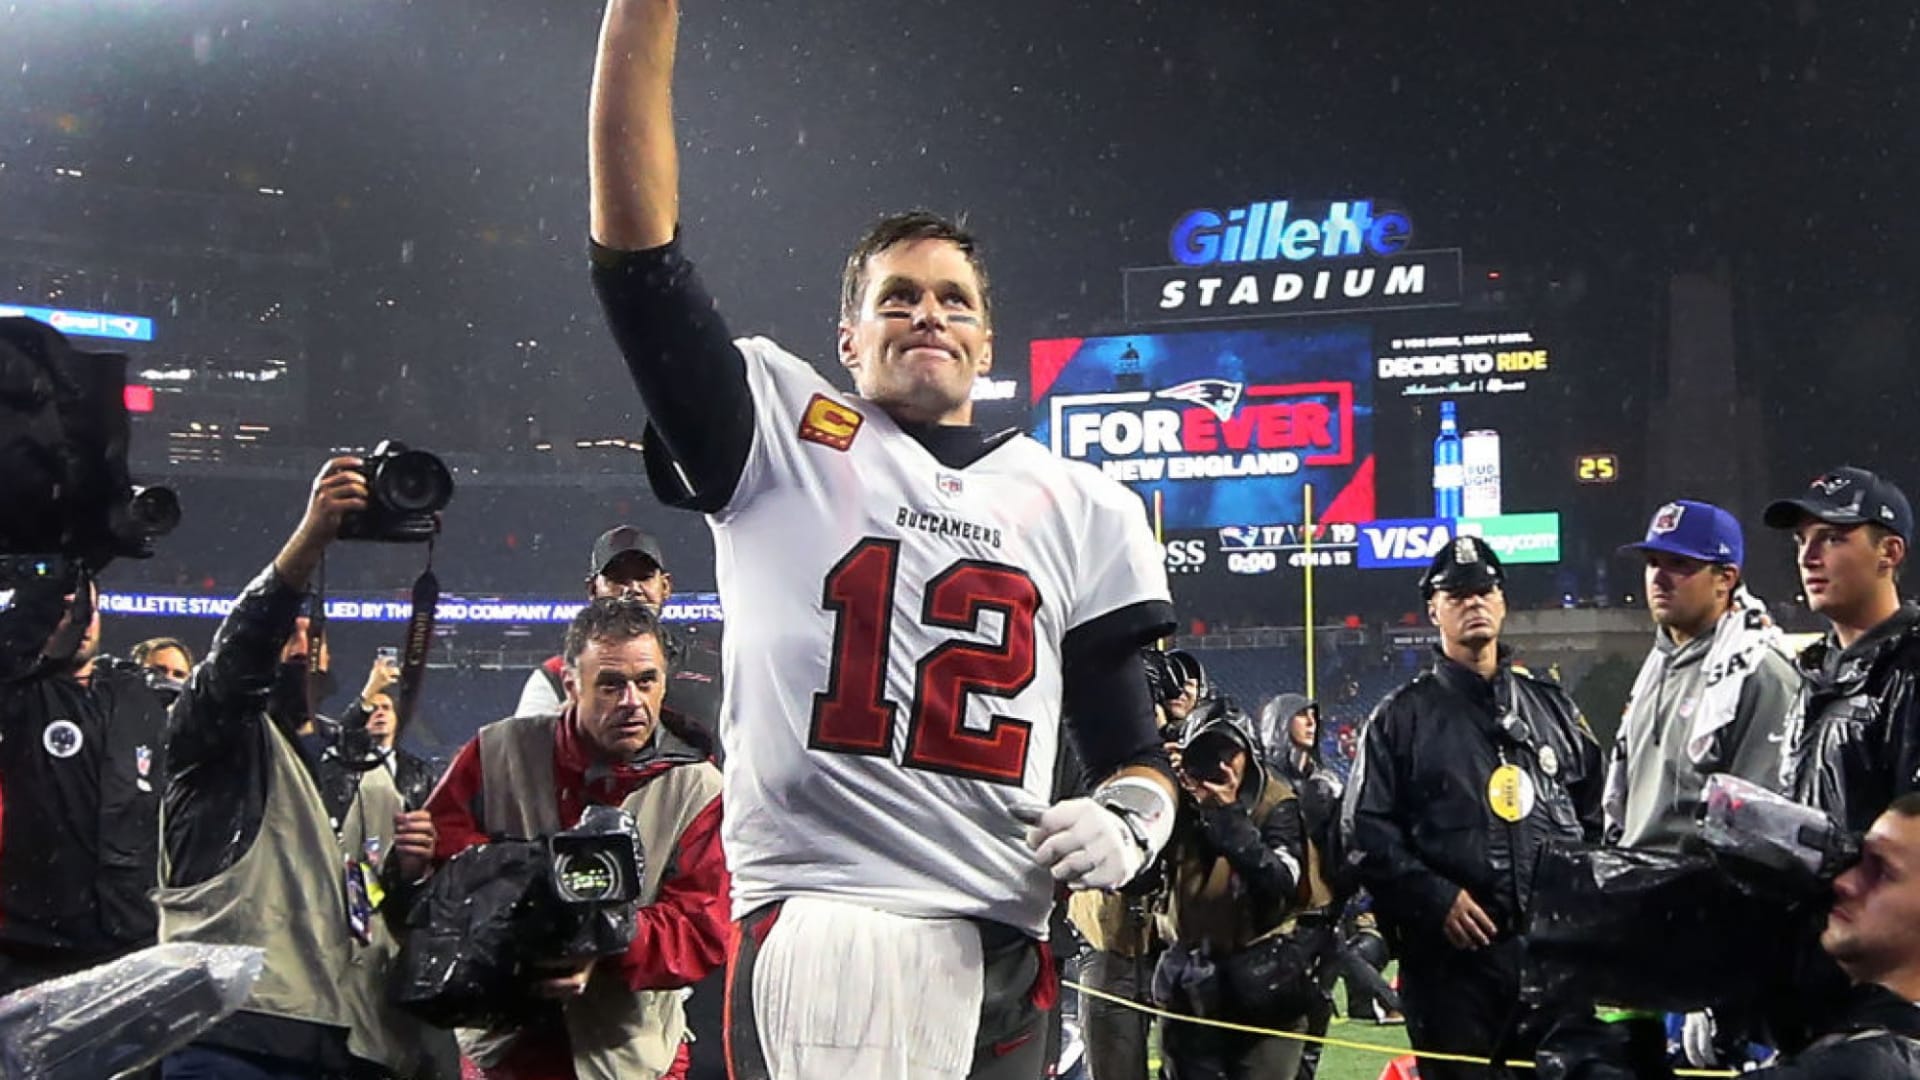 With 10 Short Words, Tom Brady Taught a Powerful Lesson About Leading Great People (Again)